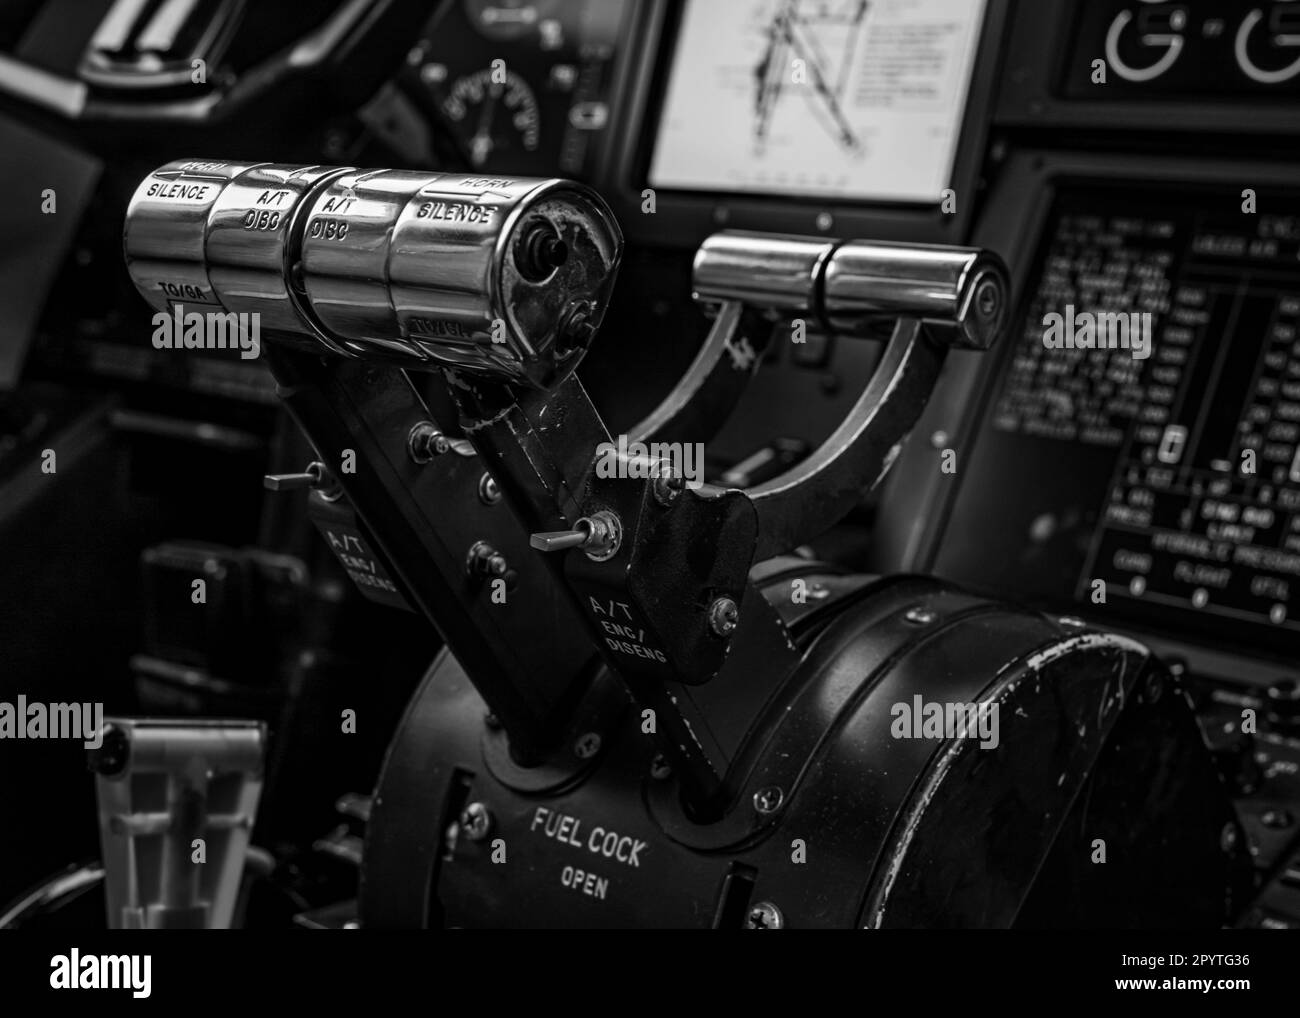 A black and white image of a helicopter cockpit, featuring a variety of electronic instruments and controls Stock Photo